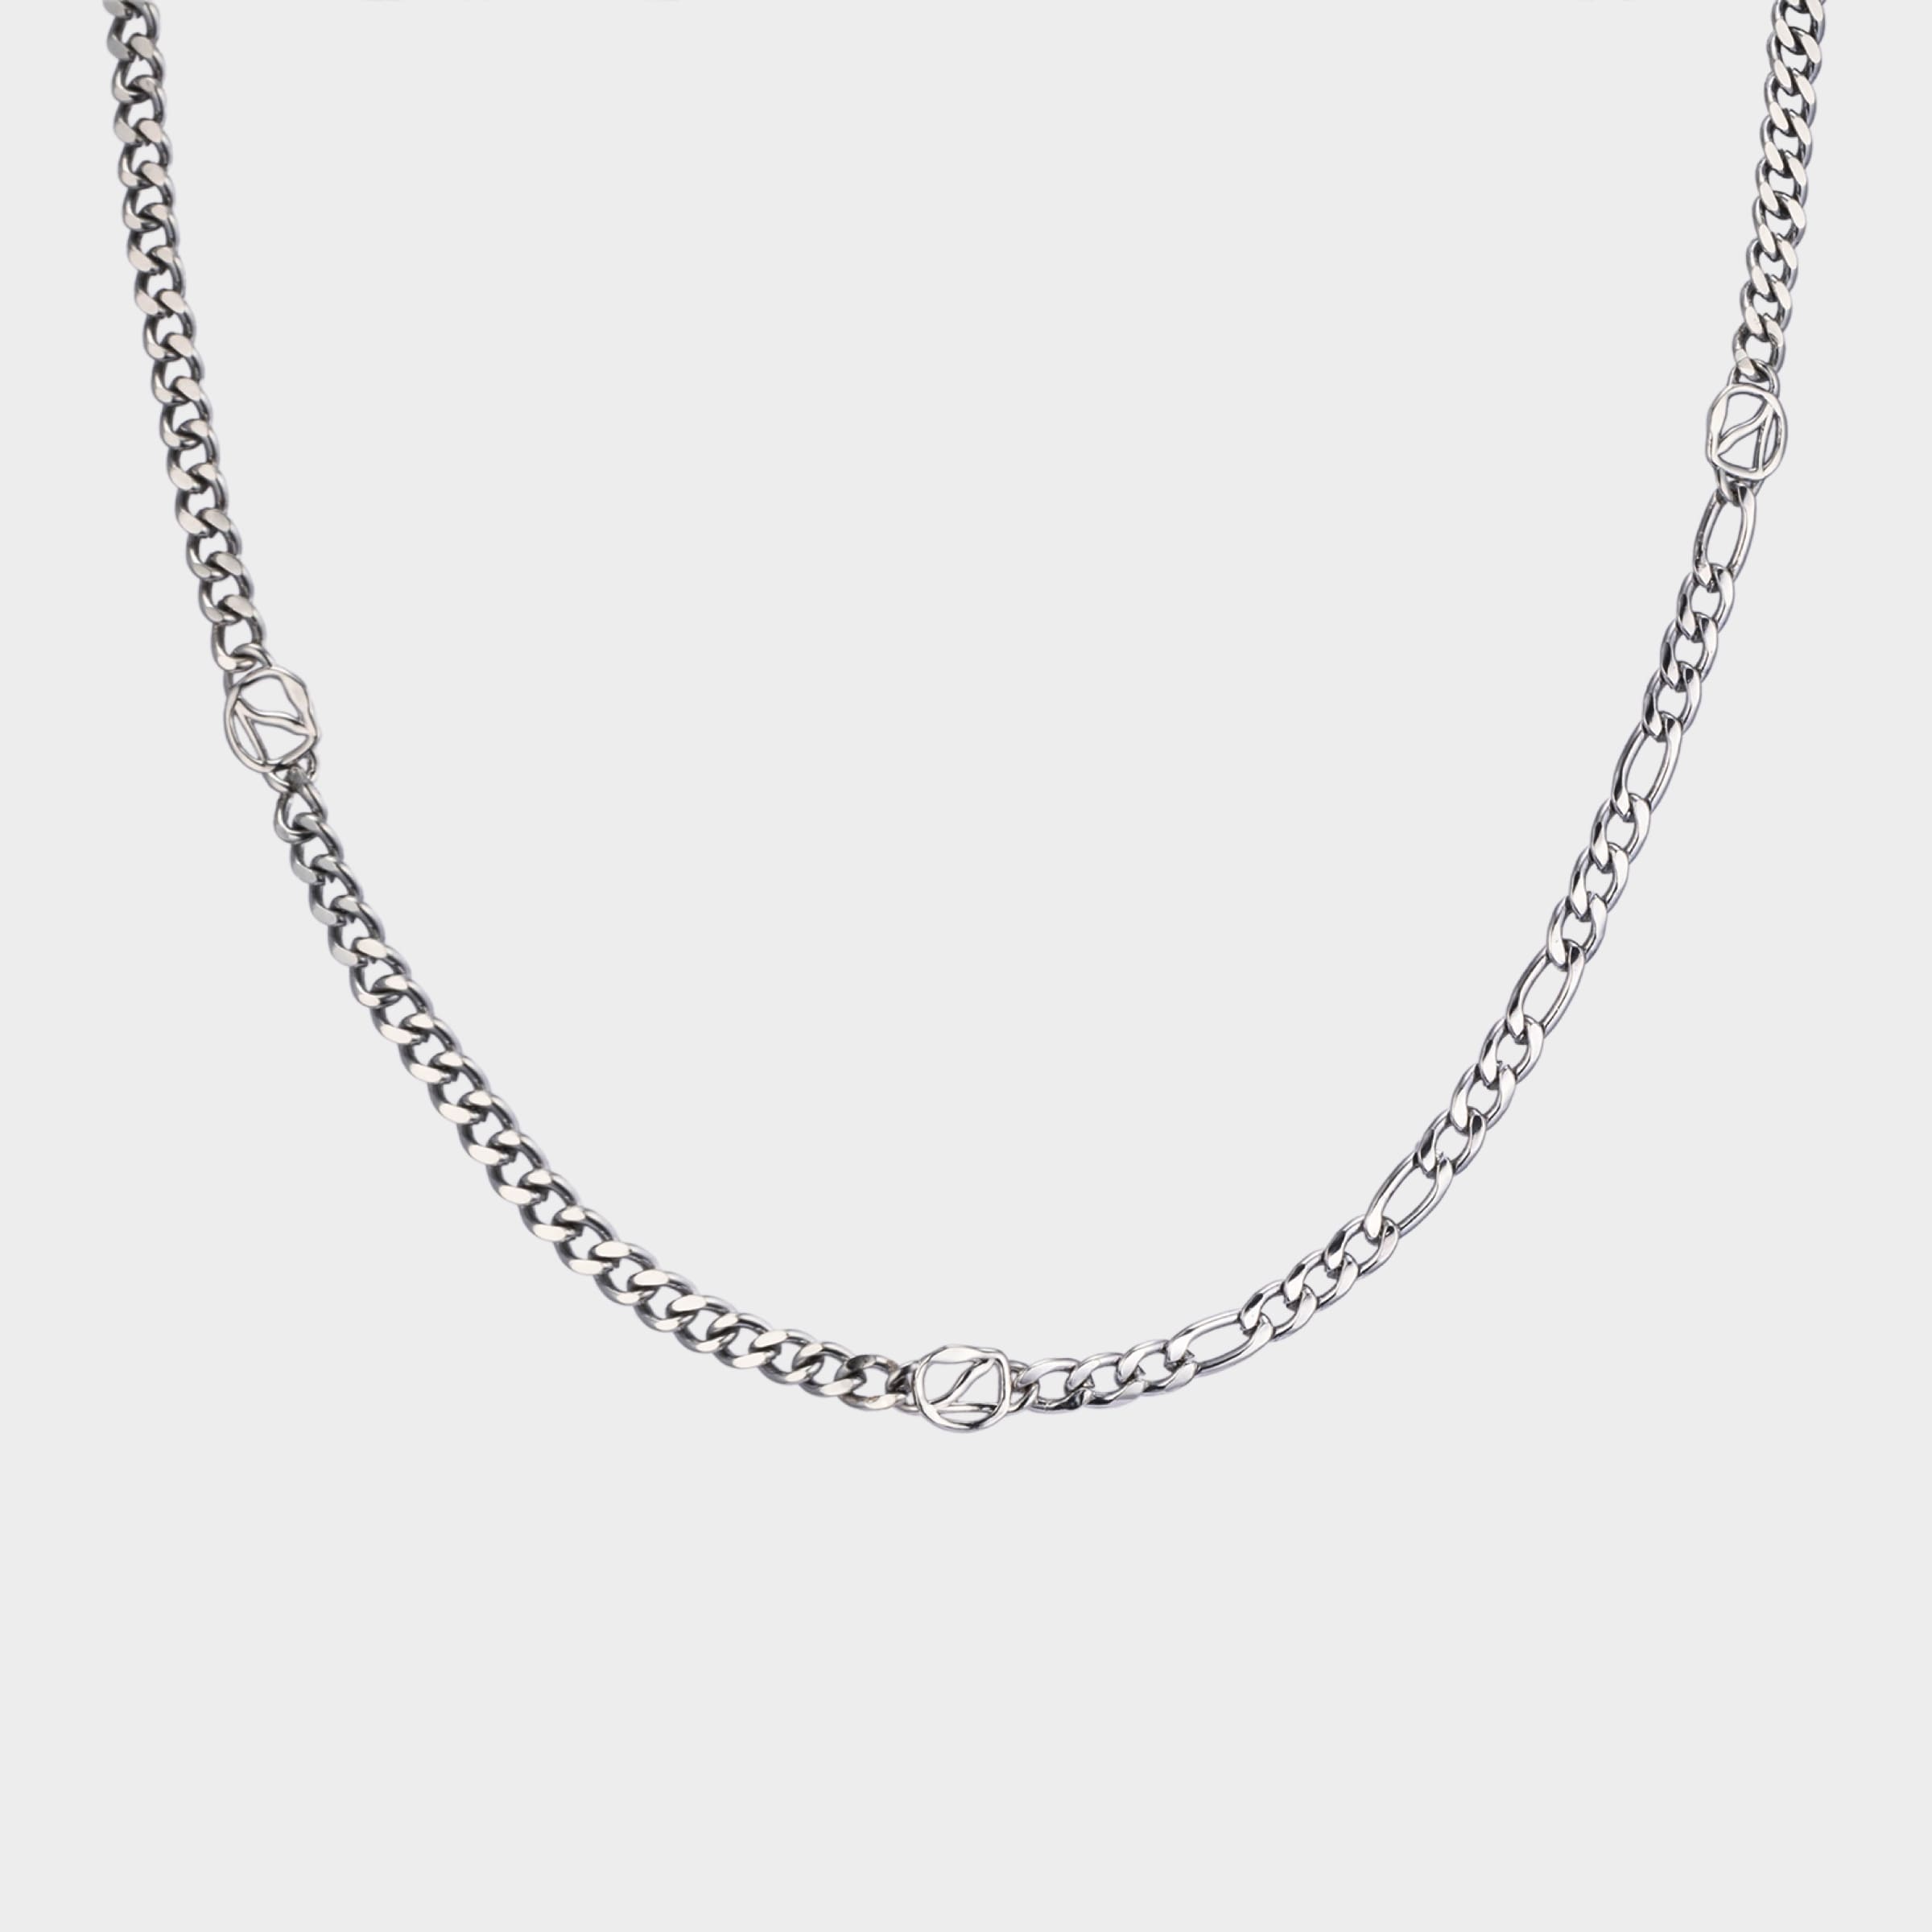 Zミックス チェーン ネックレス / Z MIX CHAIN NECKLACE